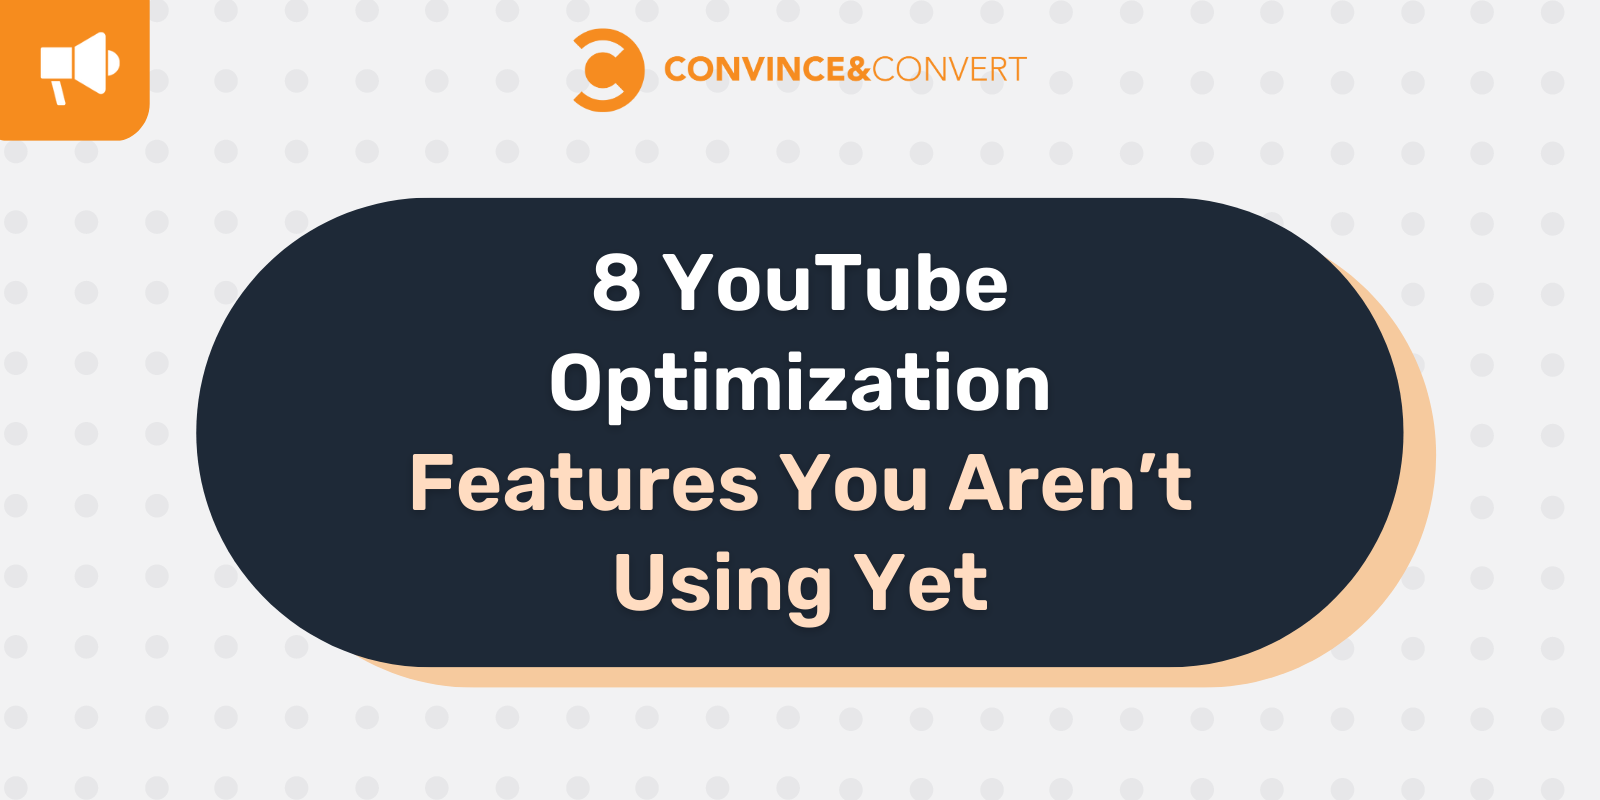 8 YouTube Optimization Features You Aren’t Using Yet